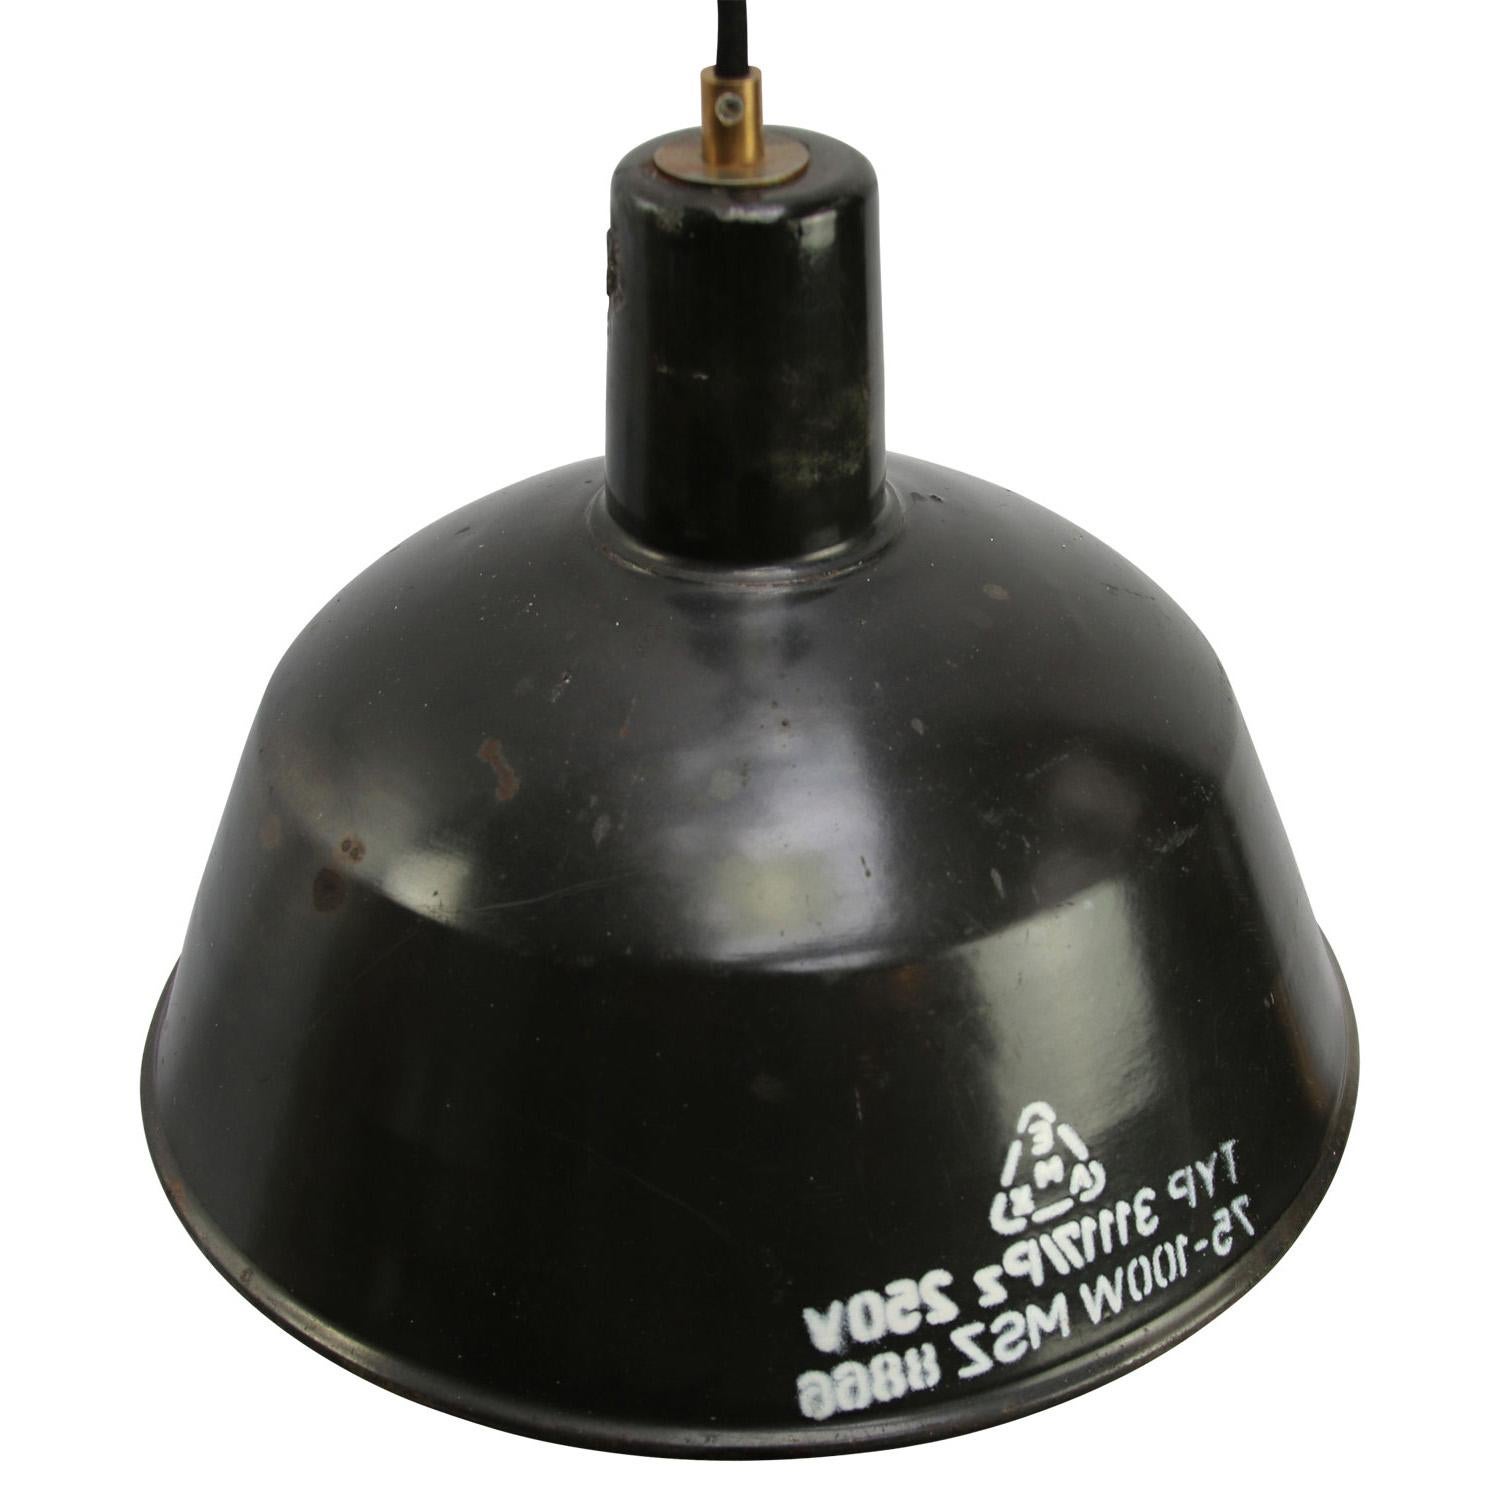 Factory hanging light.
black enamel, white type, white interior.

Weight: 1.20 kg / 2.6 lb.

Priced per individual item. All lamps have been made suitable by international standards for incandescent light bulbs, energy-efficient and LED bulbs.